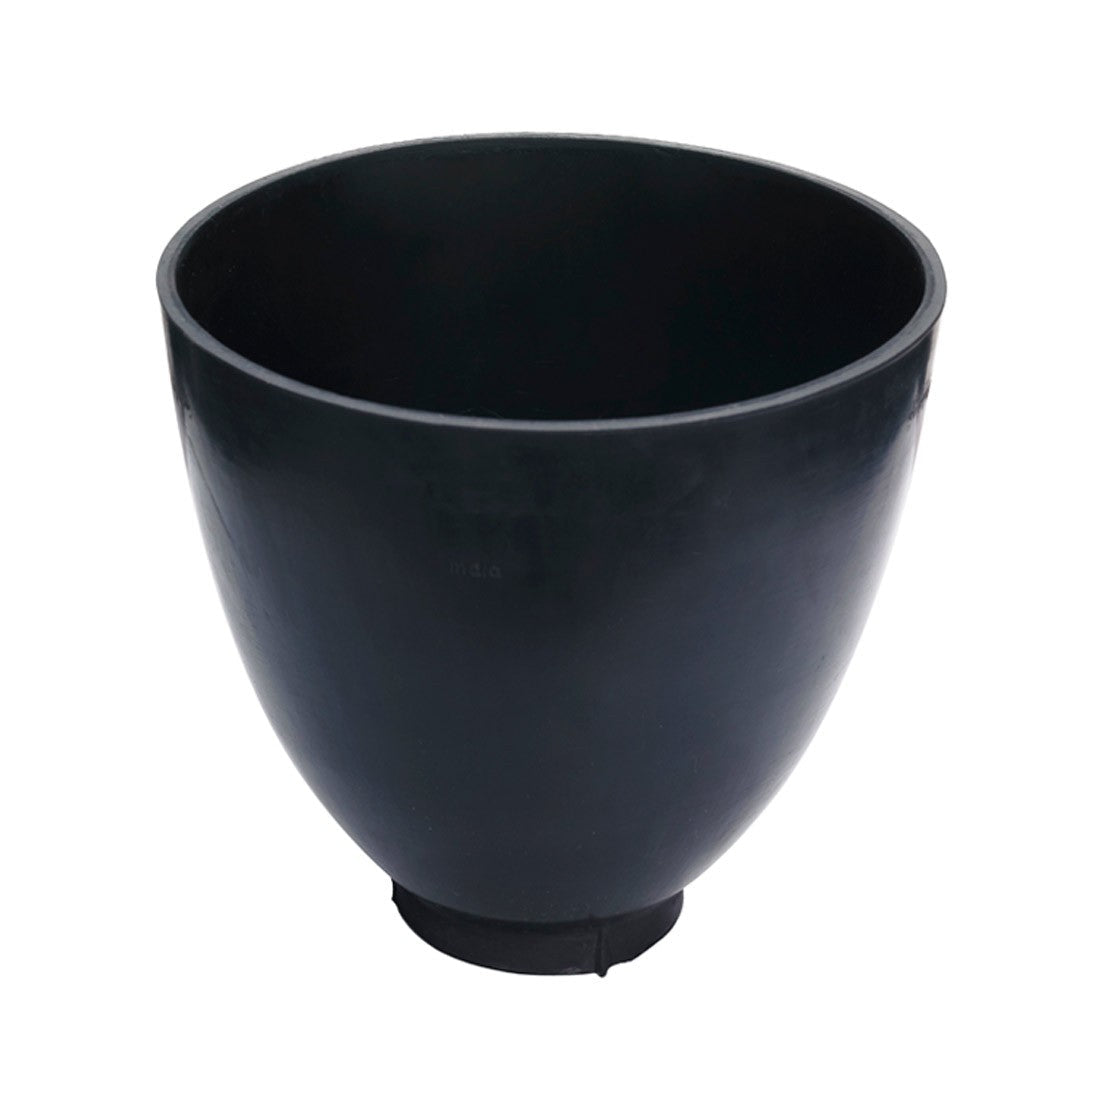 Investment Rubber Mixing Bowls